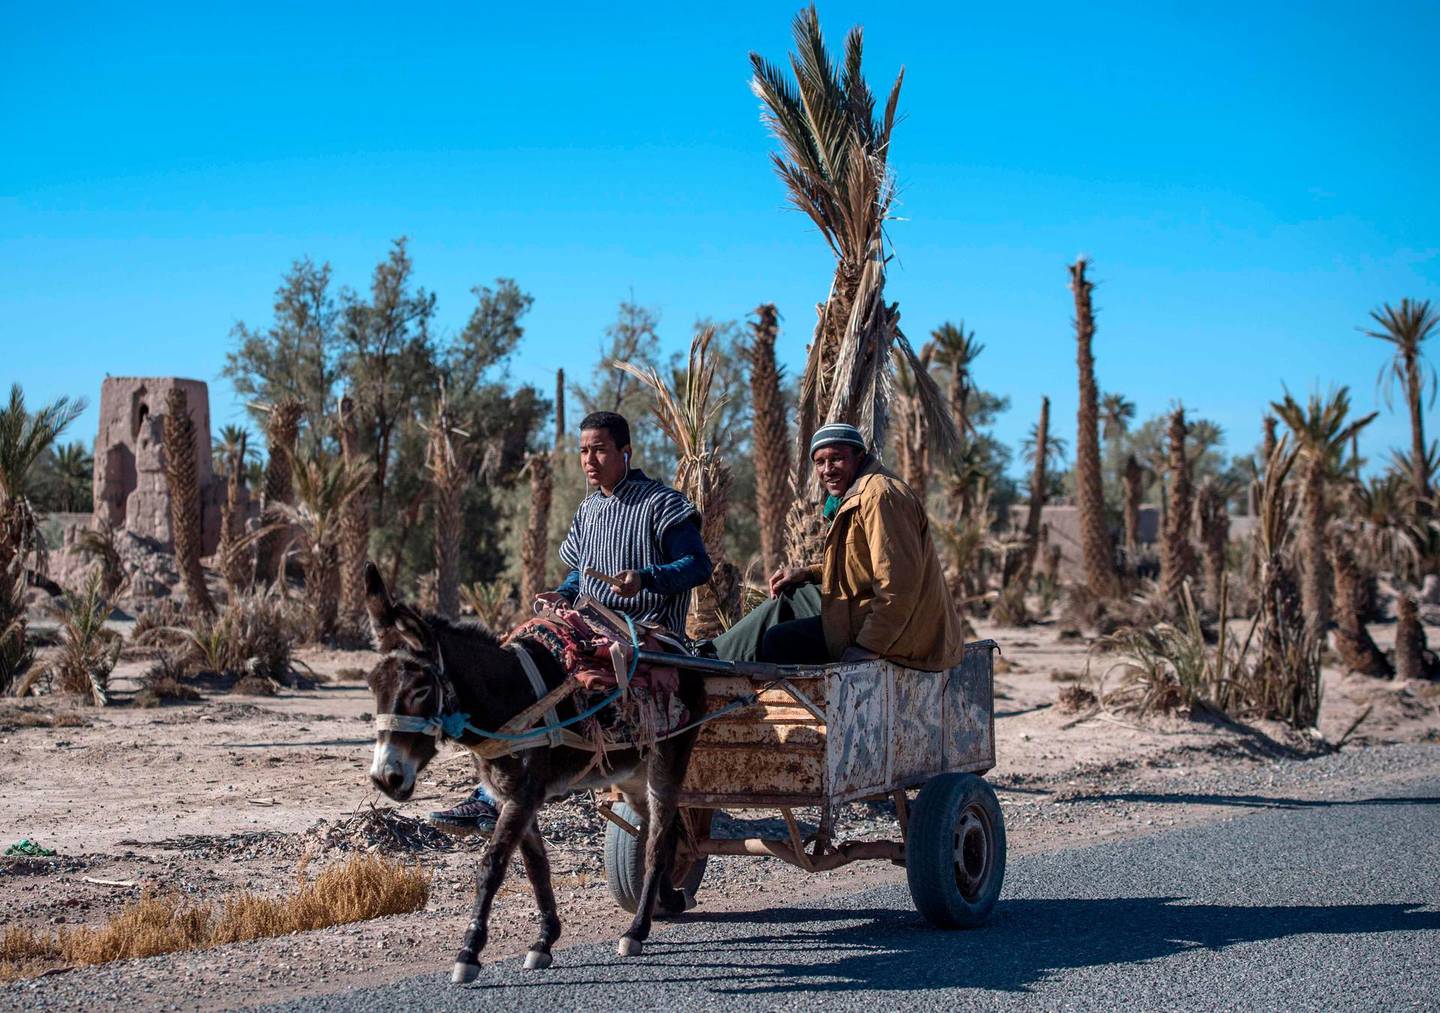 Farmers ride a donkey-cart past dead palm trees in Morocco's oasis of Skoura, a rural oasis area of around 40 square kilometres, on January 27, 2020. For centuries, Morocco's oases have been home to human settlements, agriculture, and important architectural and cultural heritage, thanks also to trans-Saharan trade caravan routes. Long a buffer against desertification, they have gone through cycles of drought in recent decades and are now "threatened with extinction", Greenpeace has warned, due to the impact of high temperatures. In most of the Skoura oasis, the ground is dry and cracked.  / AFP / FADEL SENNA
